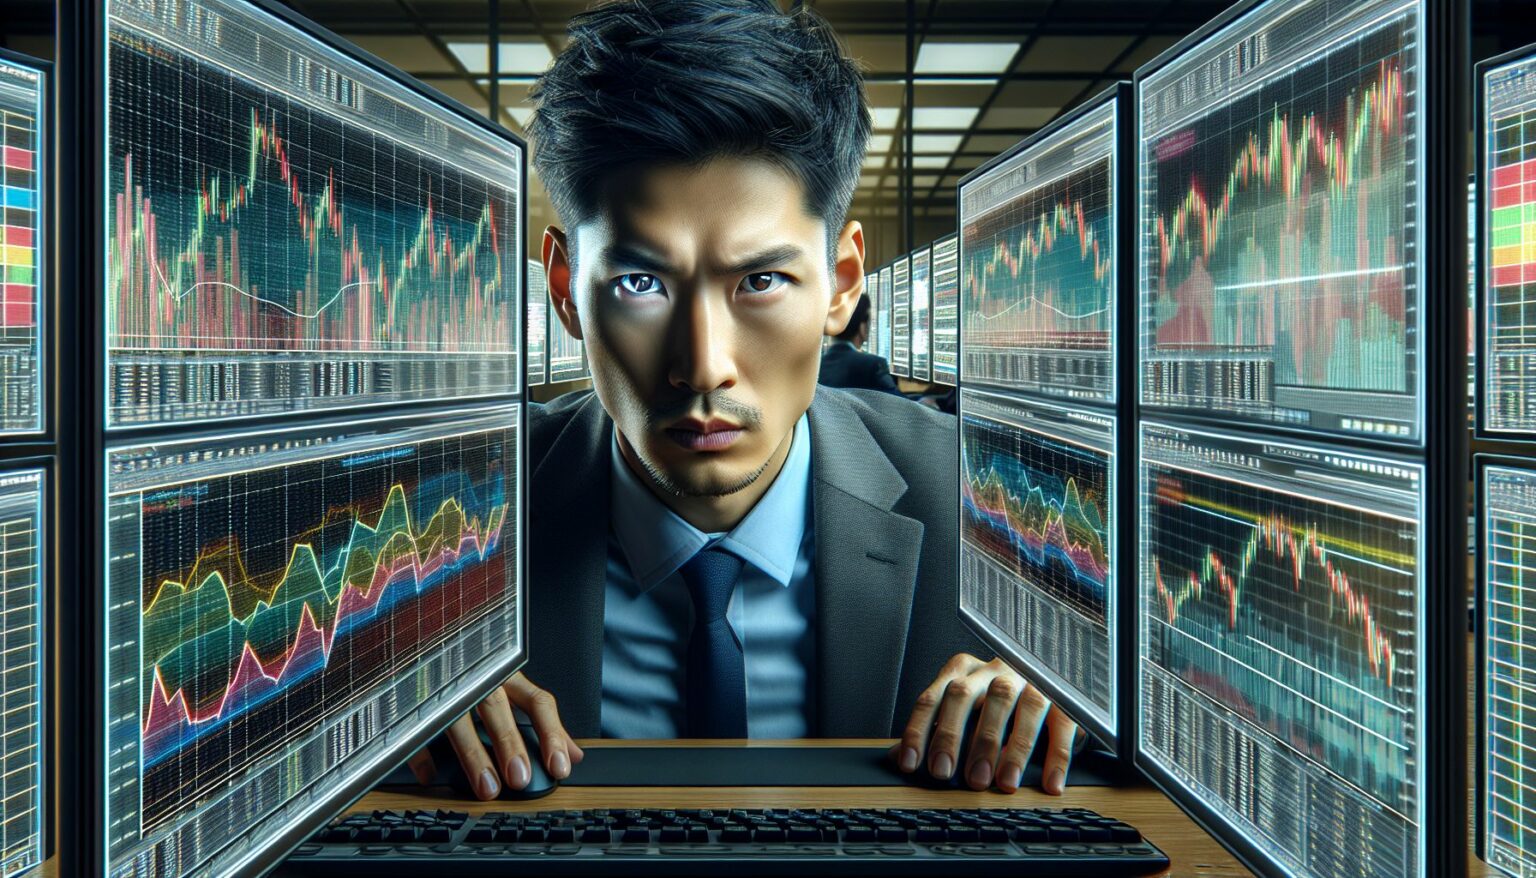 stock trader analyzing fast-moving charts on multiple computer screens